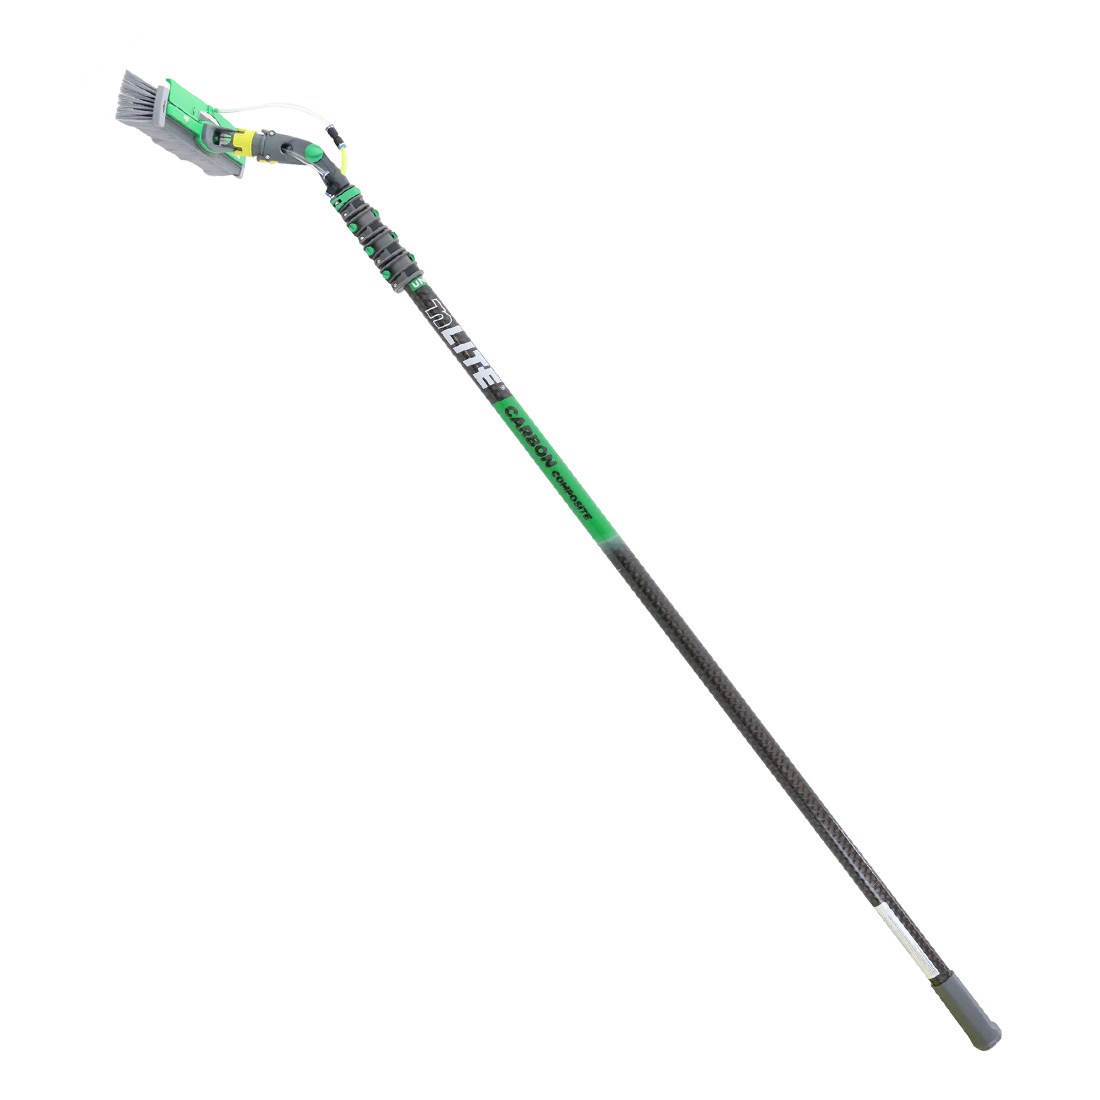 Unger nLITE Carbon Composite Water Fed Pole Kit 20 Foot - 16" Powerbrush Full View